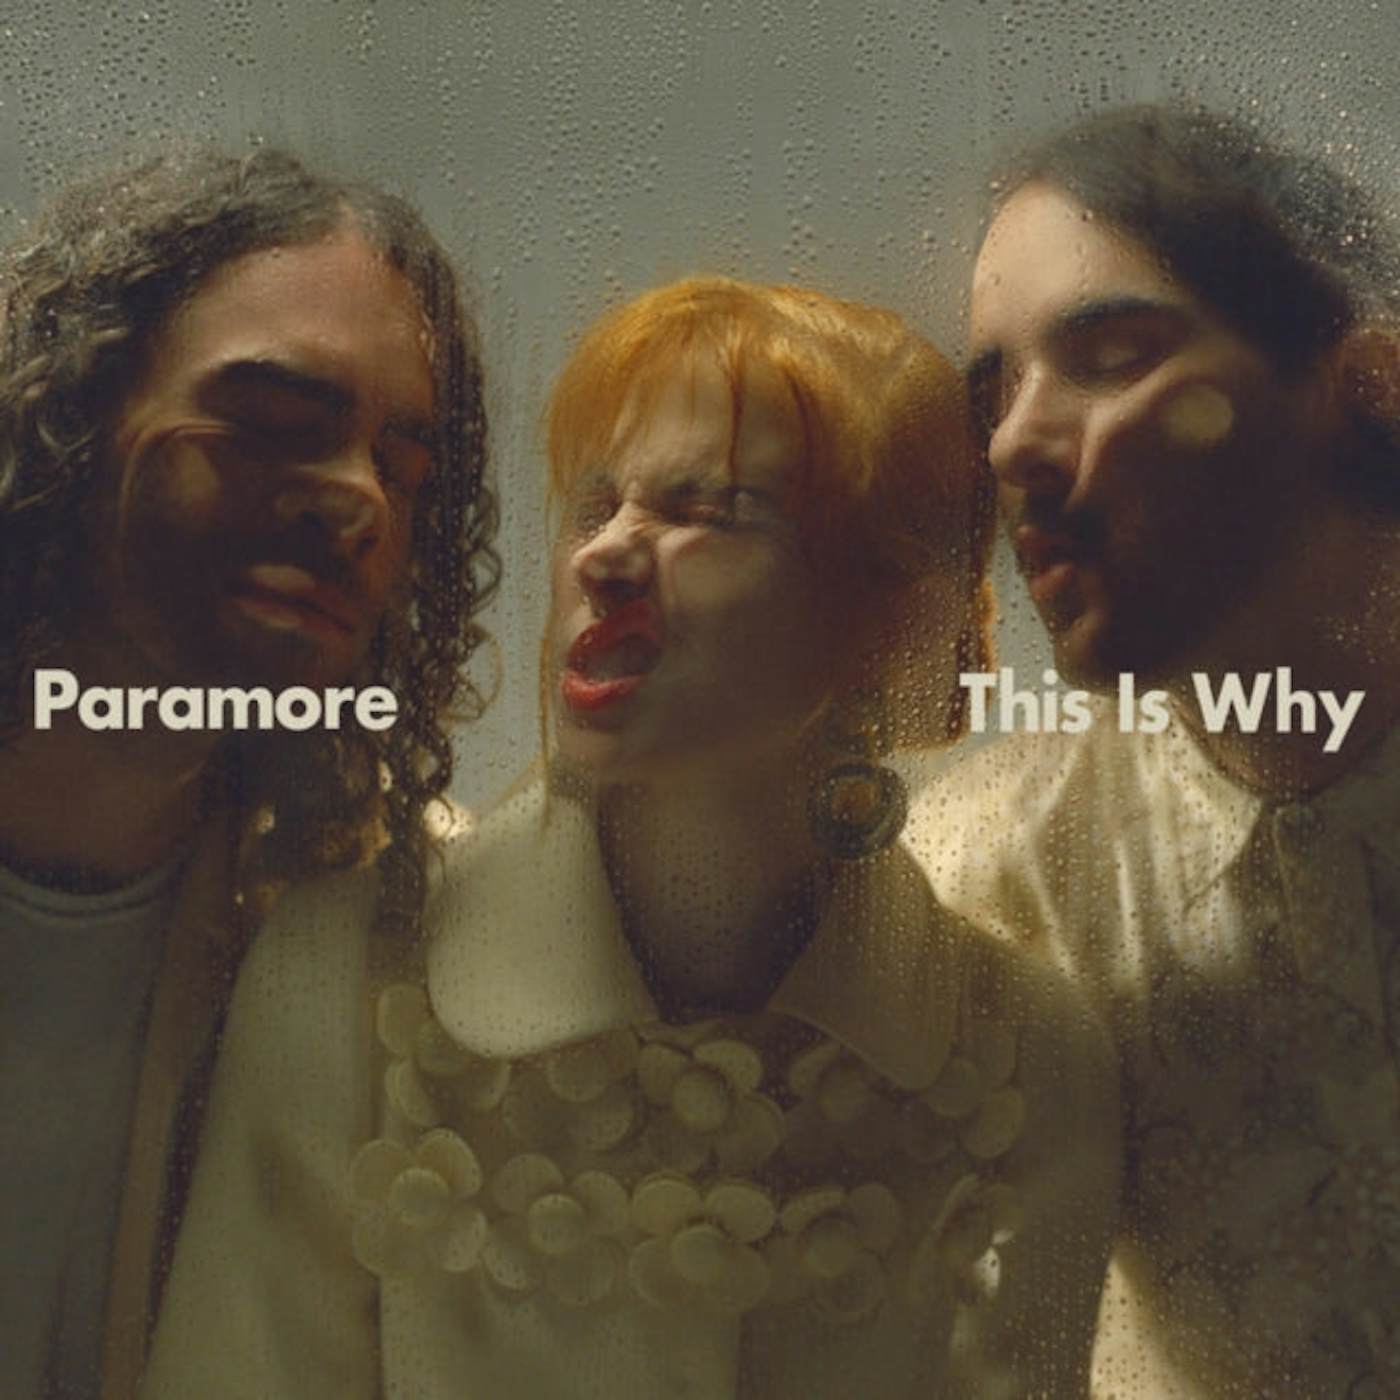 Paramore LP - This Is Why (Vinyl)